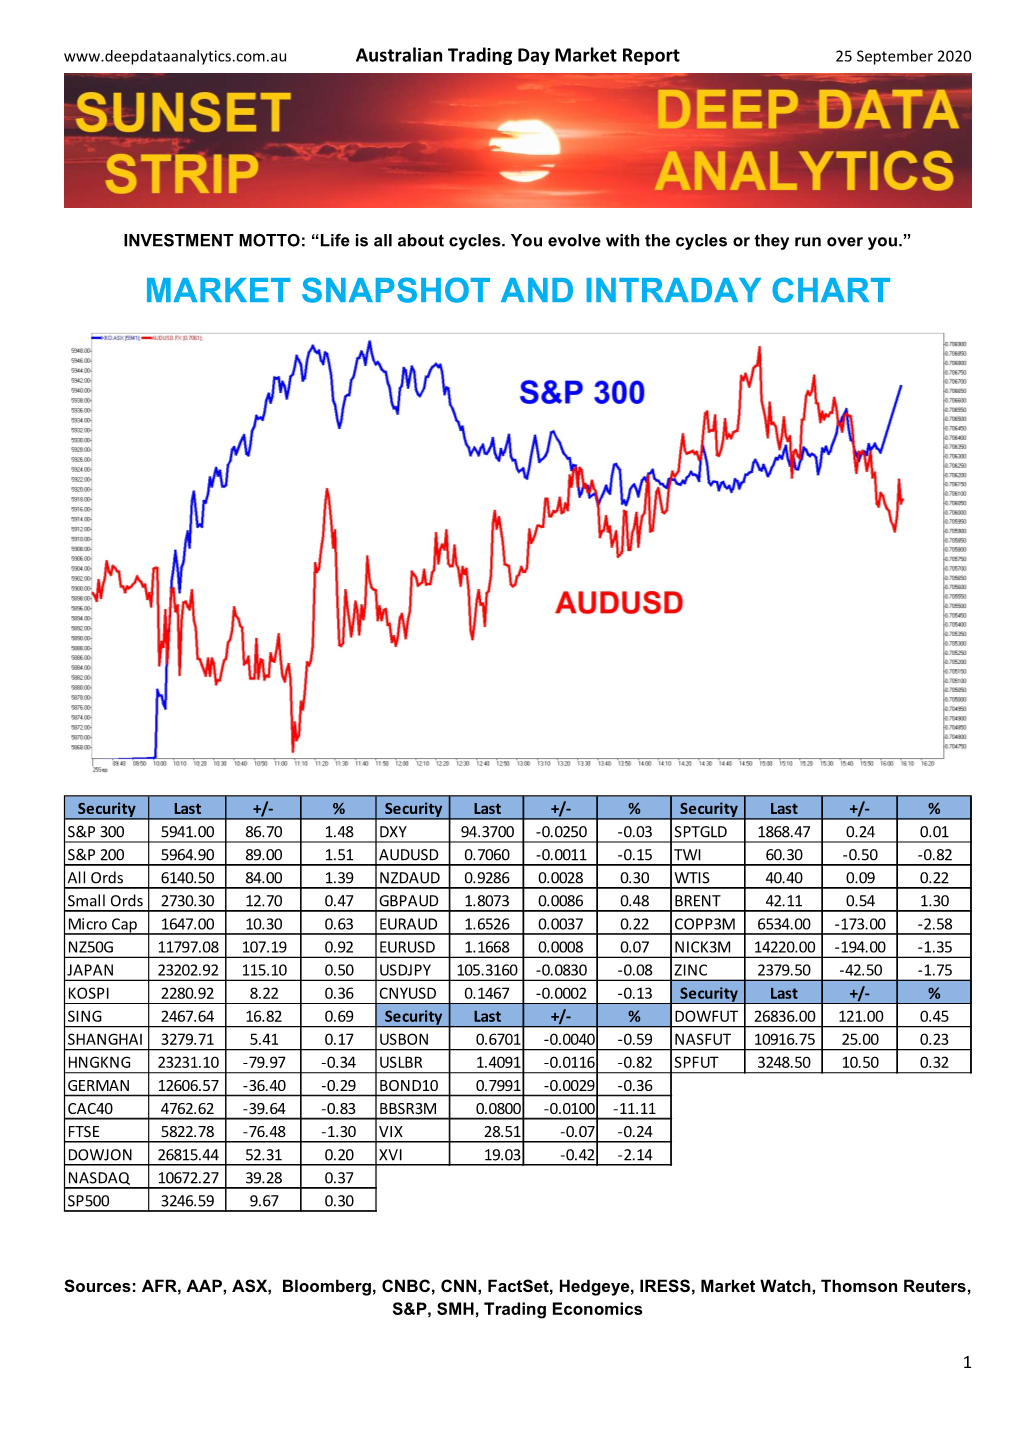 Market Snapshot and Intraday Chart